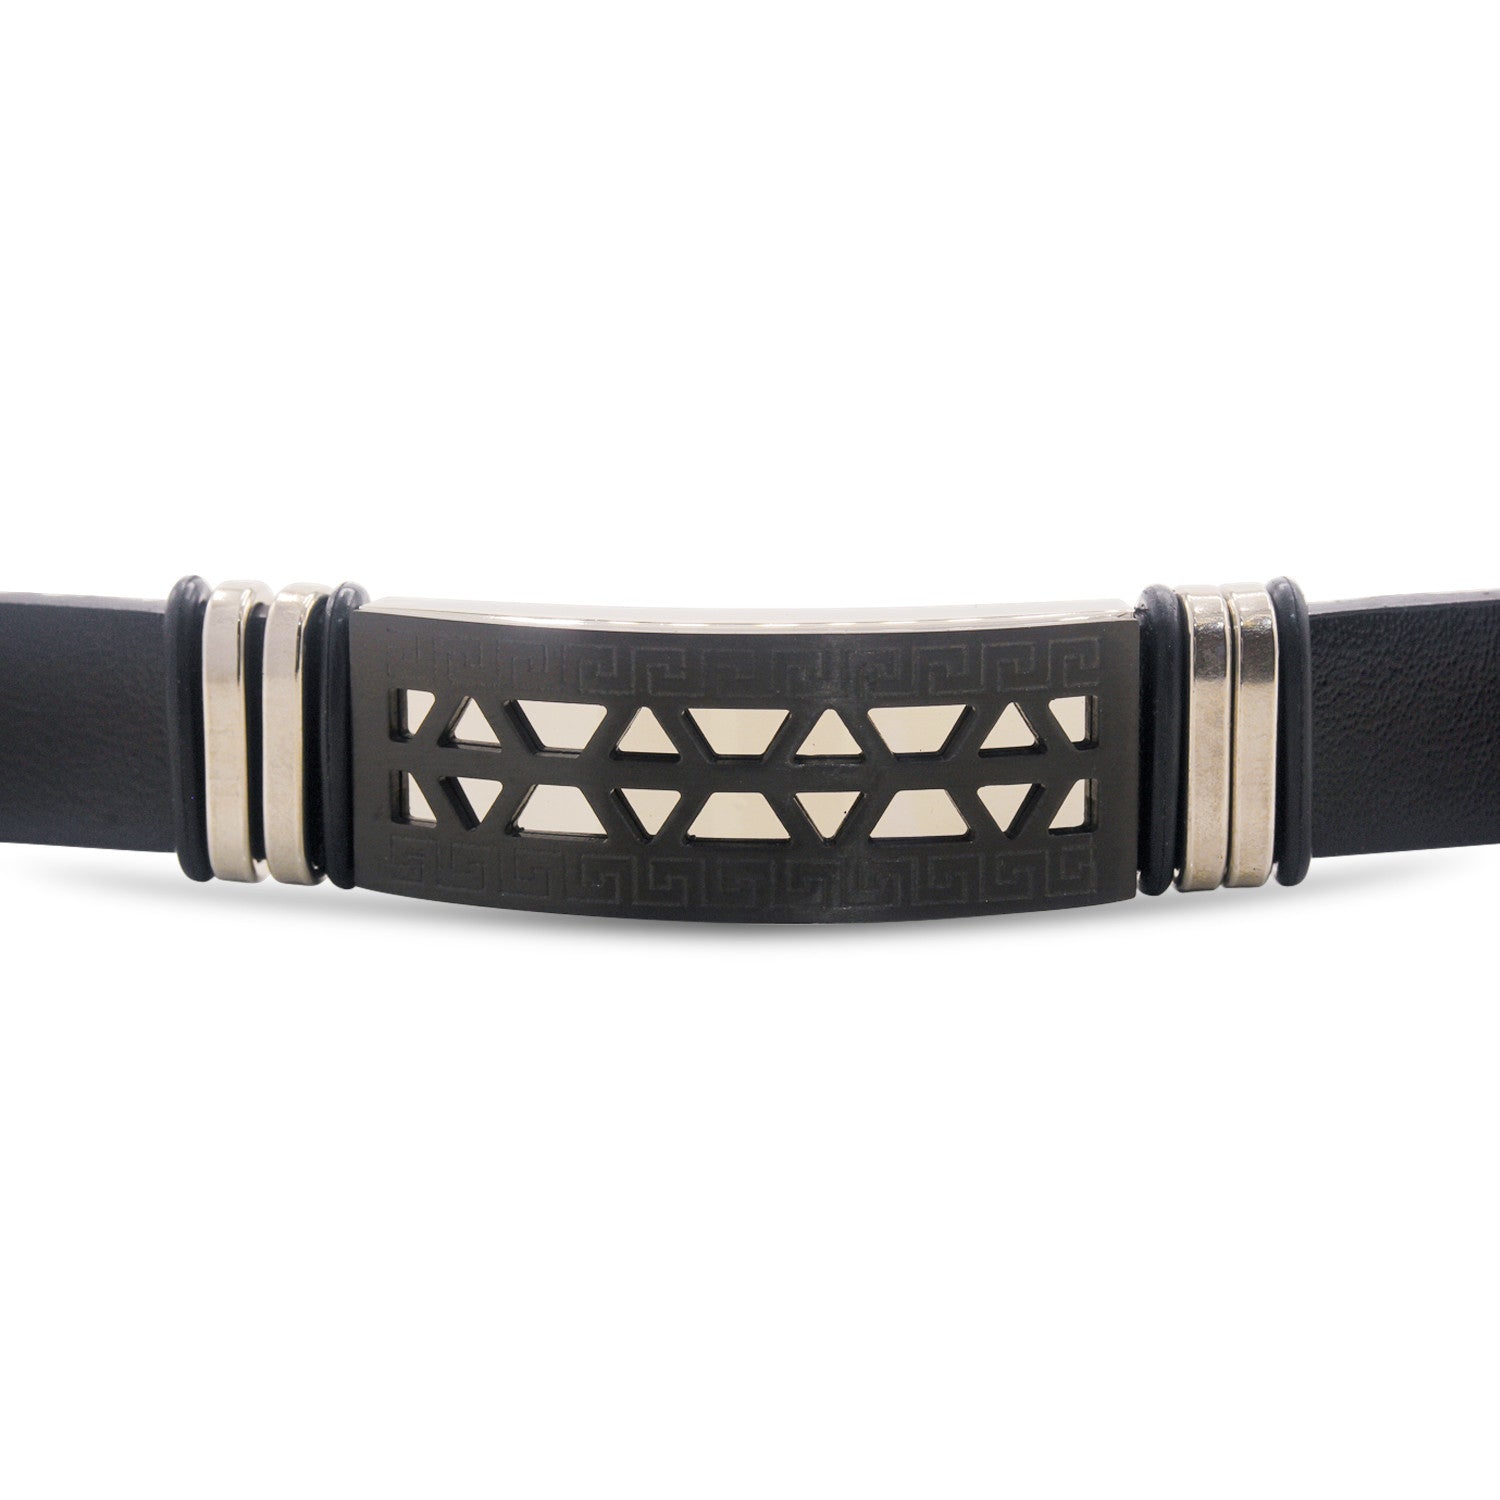 Stainless Steel Black Two Tone Design Leather Bracelet